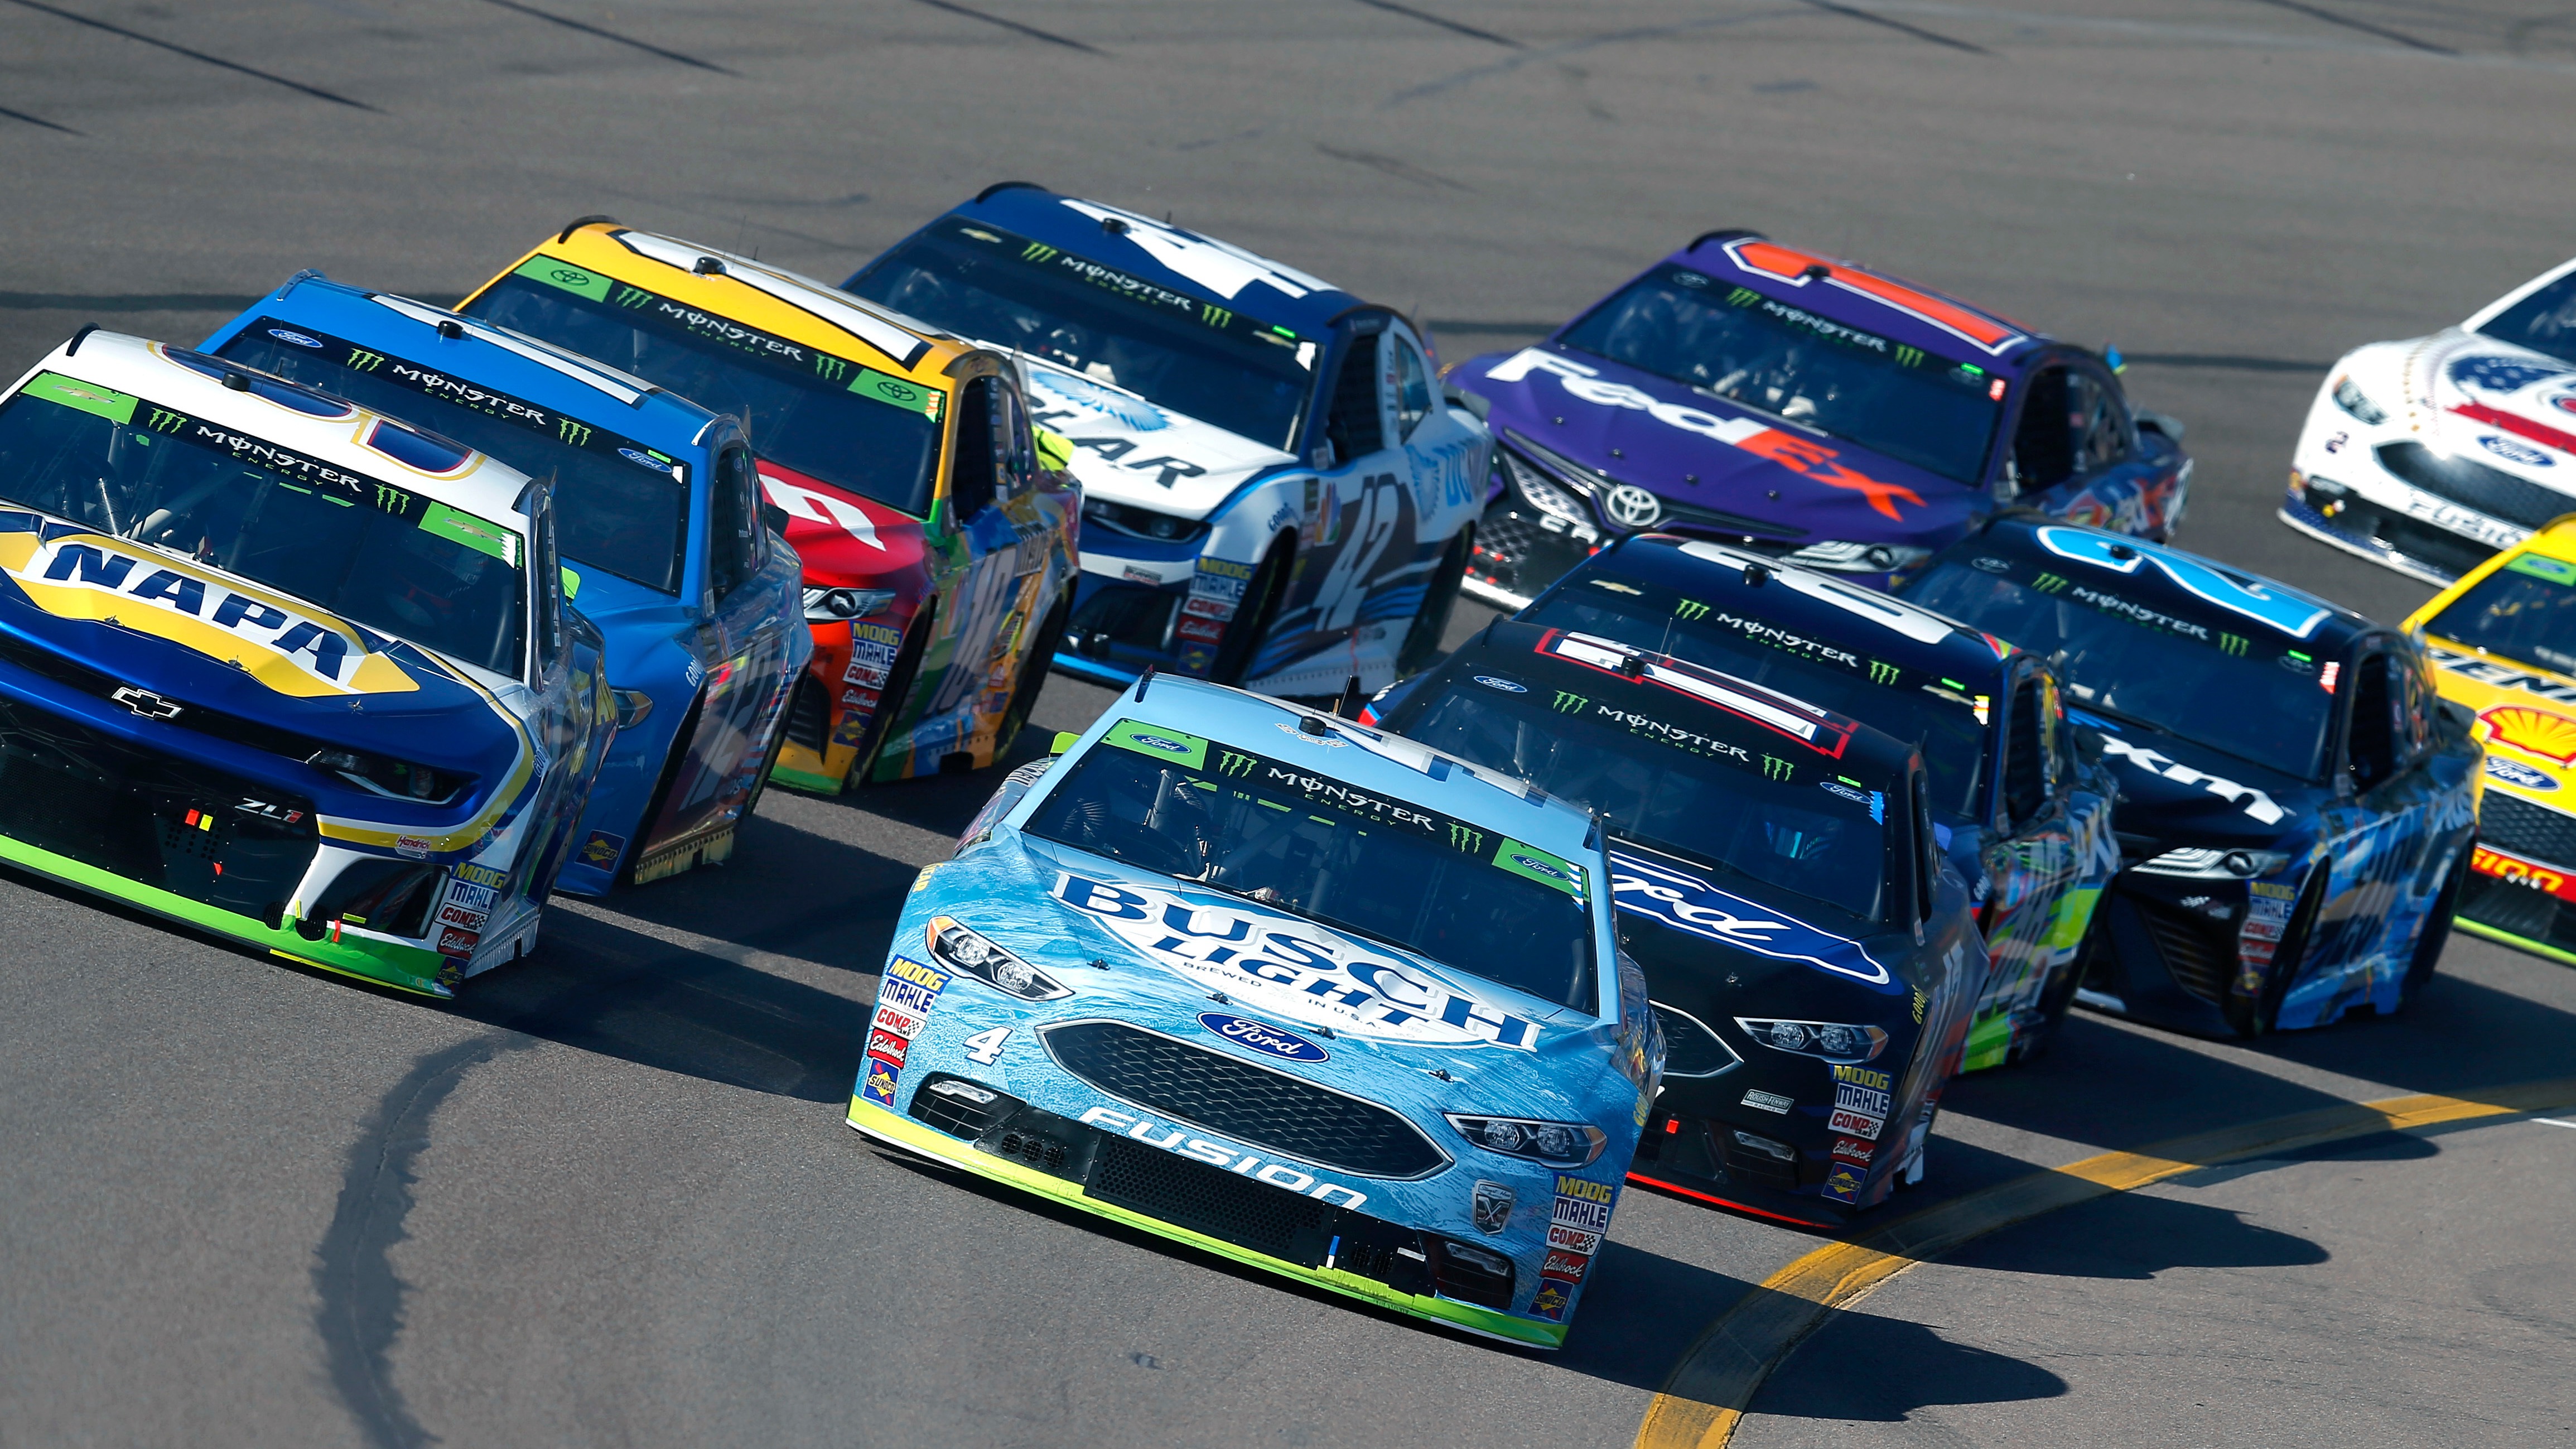 NASCAR at Phoenix betting odds, props, key stats to help bettors win